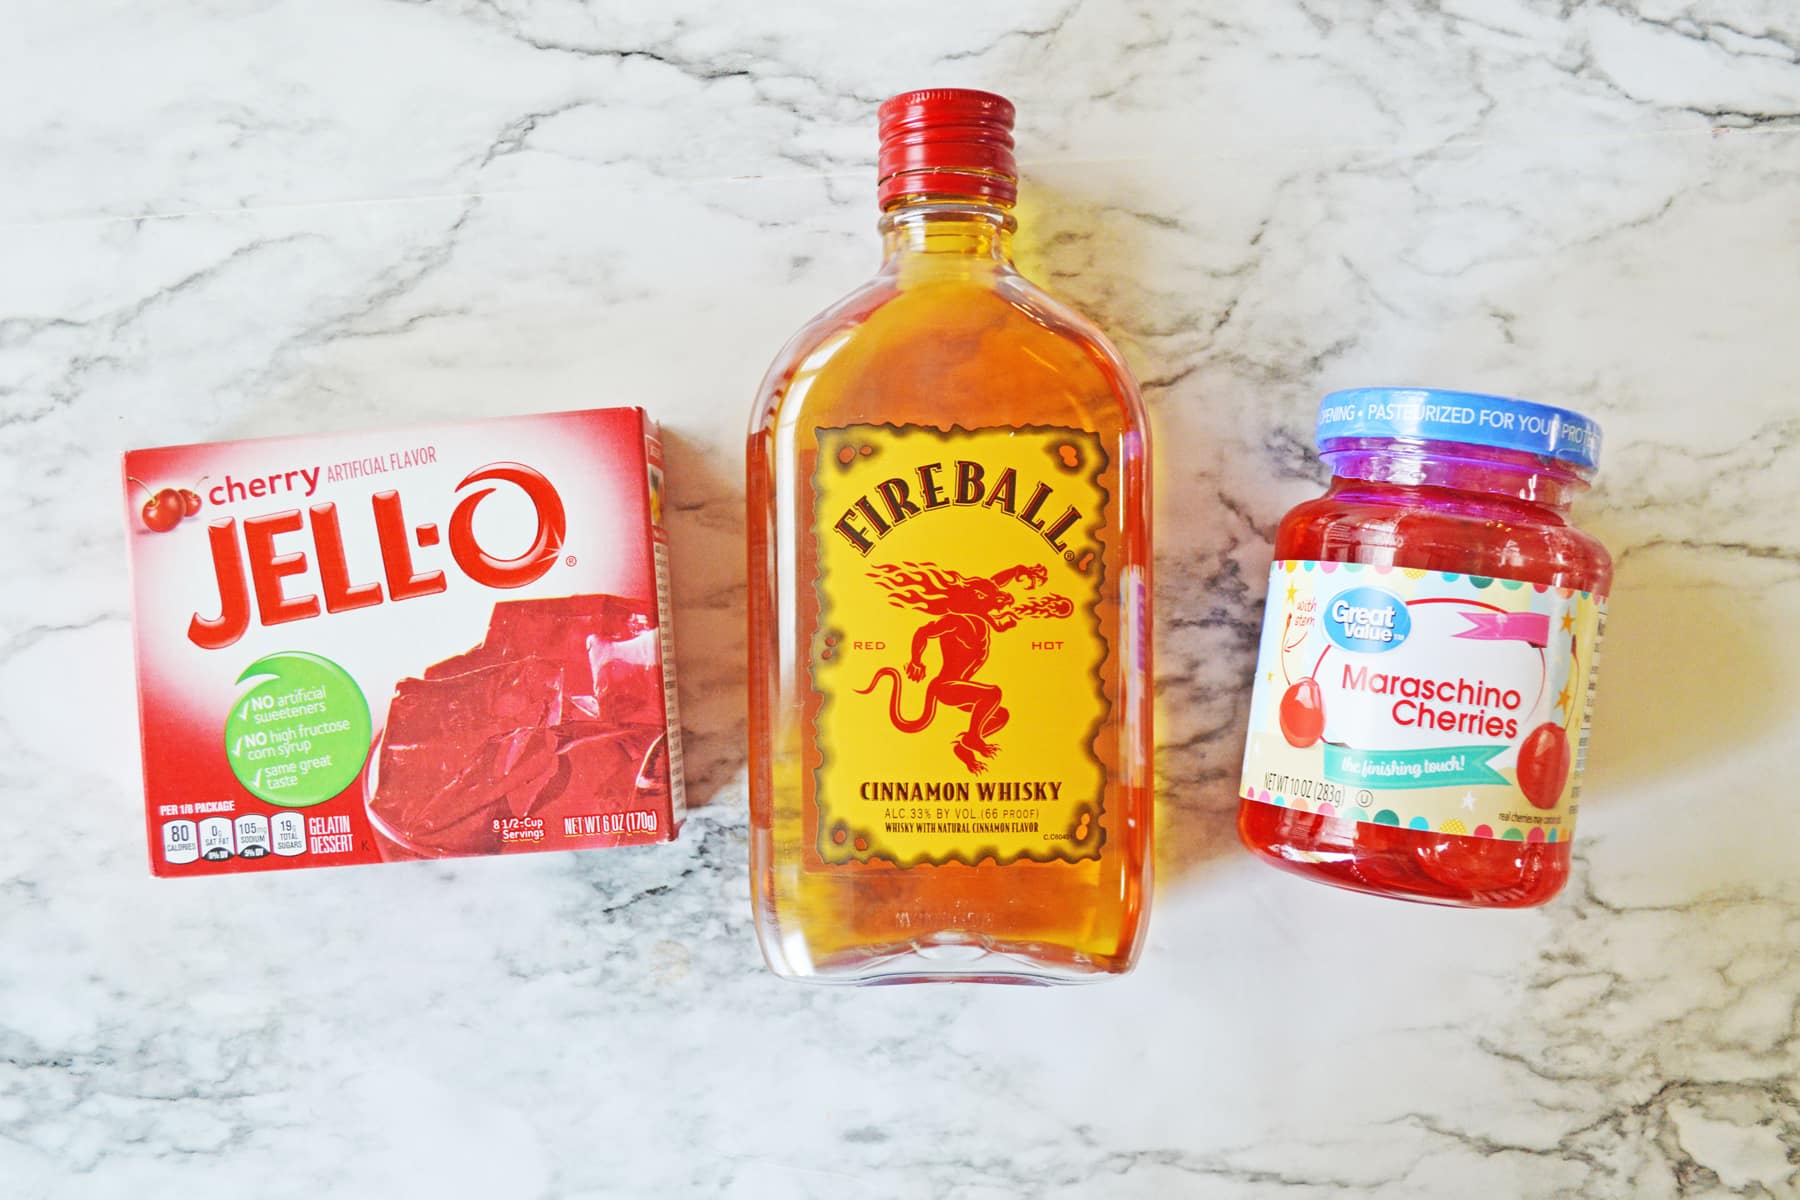 Ingredients for Cherry Fireball Jello Shots includes Jell-), Cinnamon whisky, and cherries